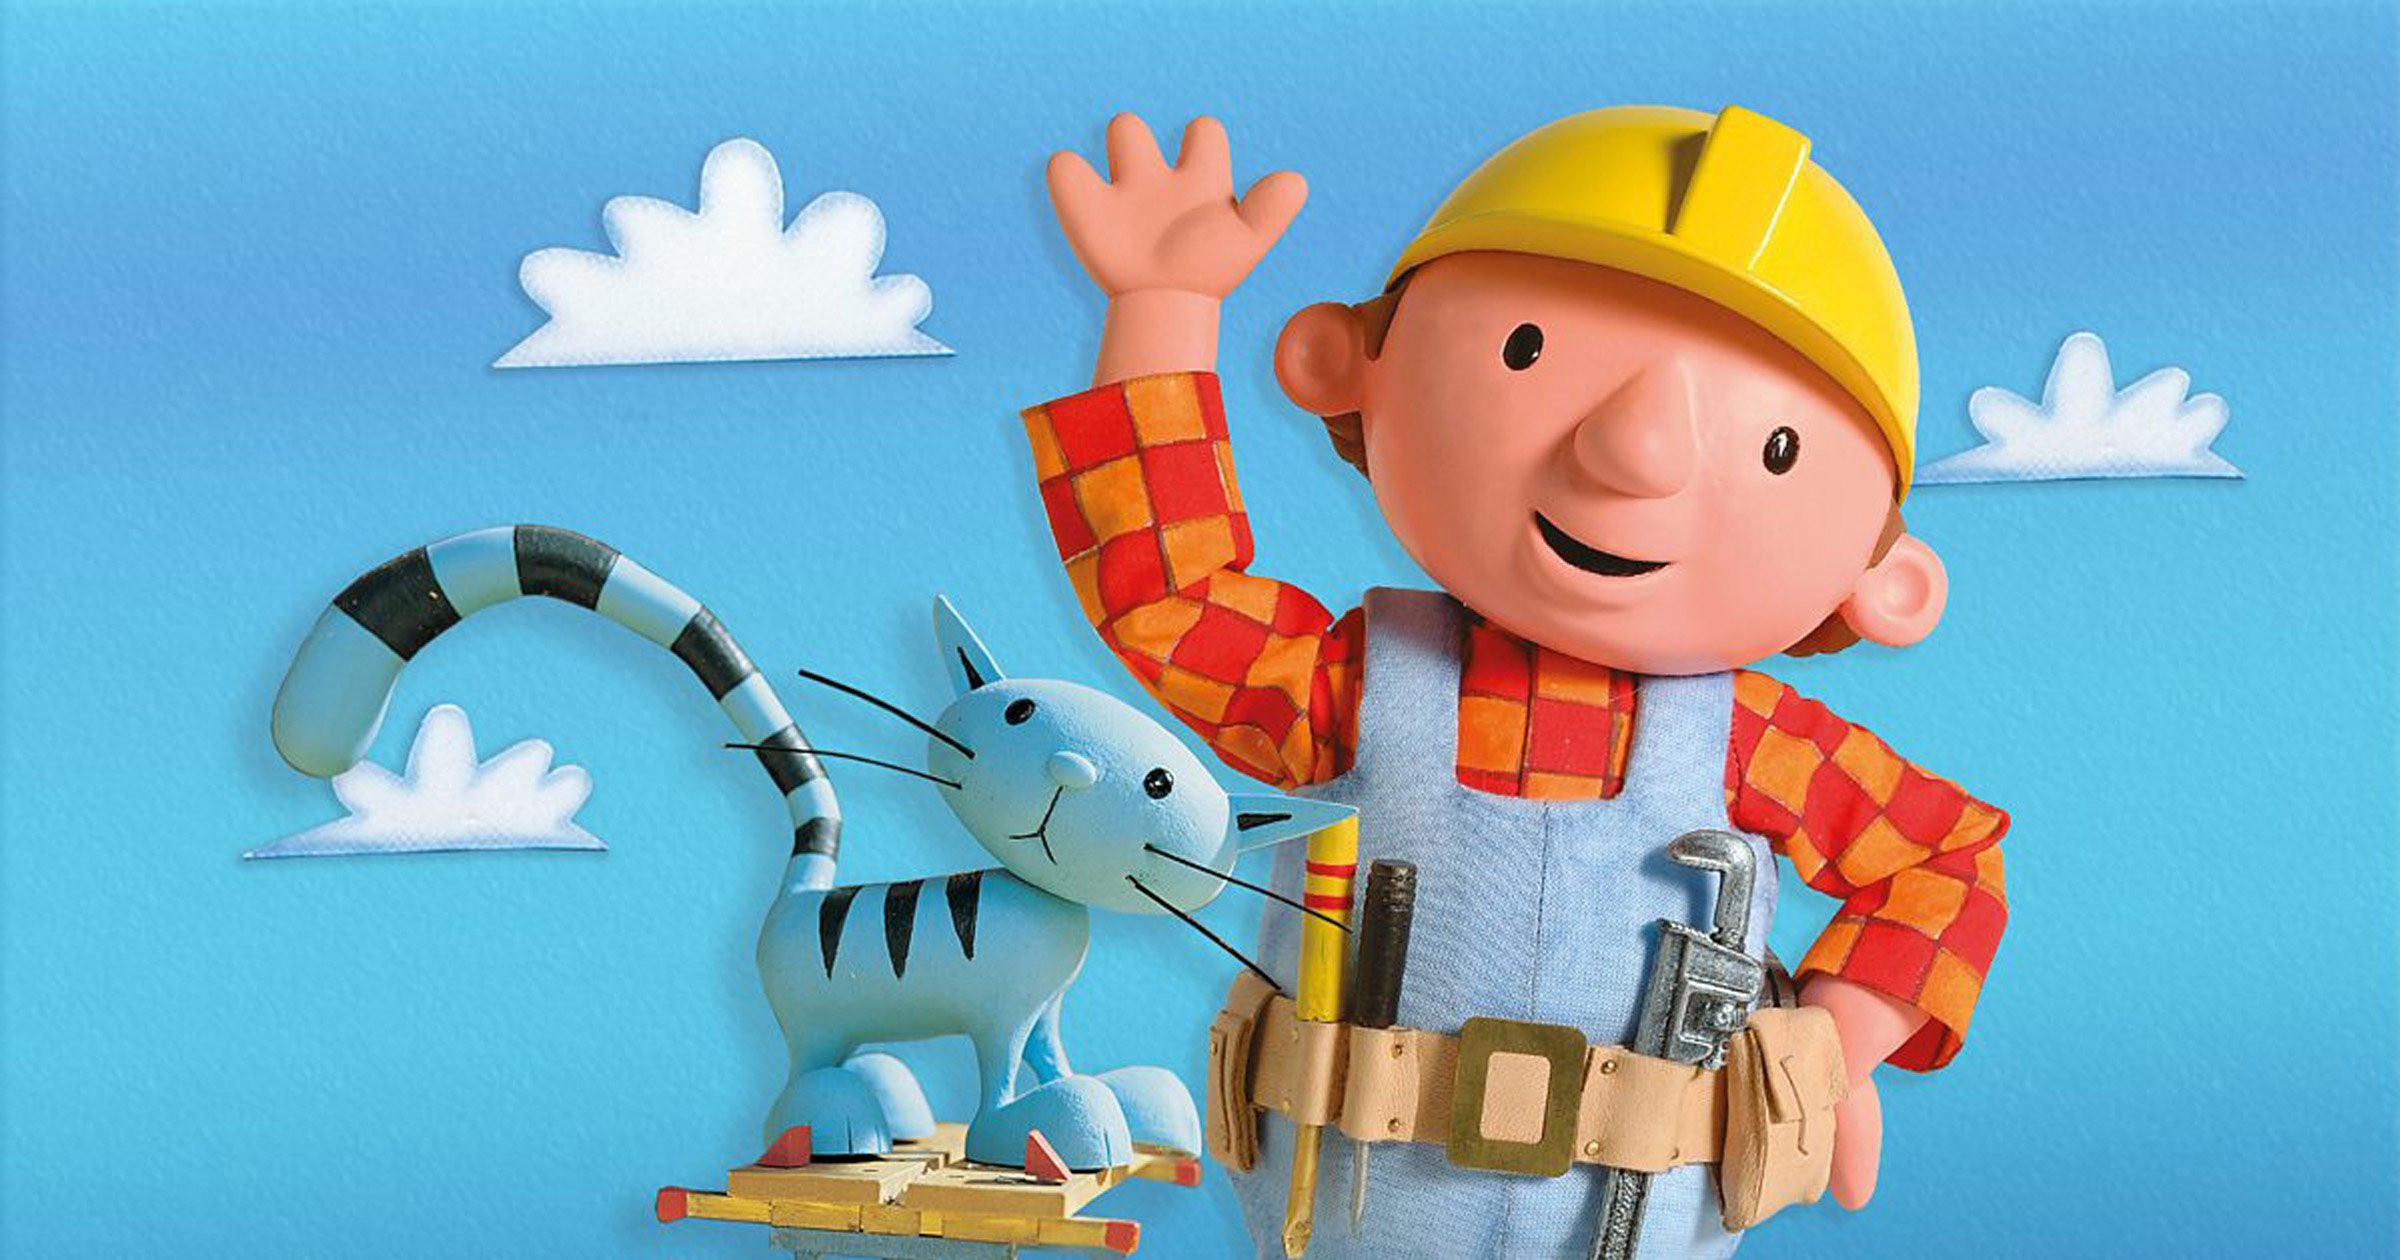 A picture of Bob the Builder (a fictional character) in his work gear along...